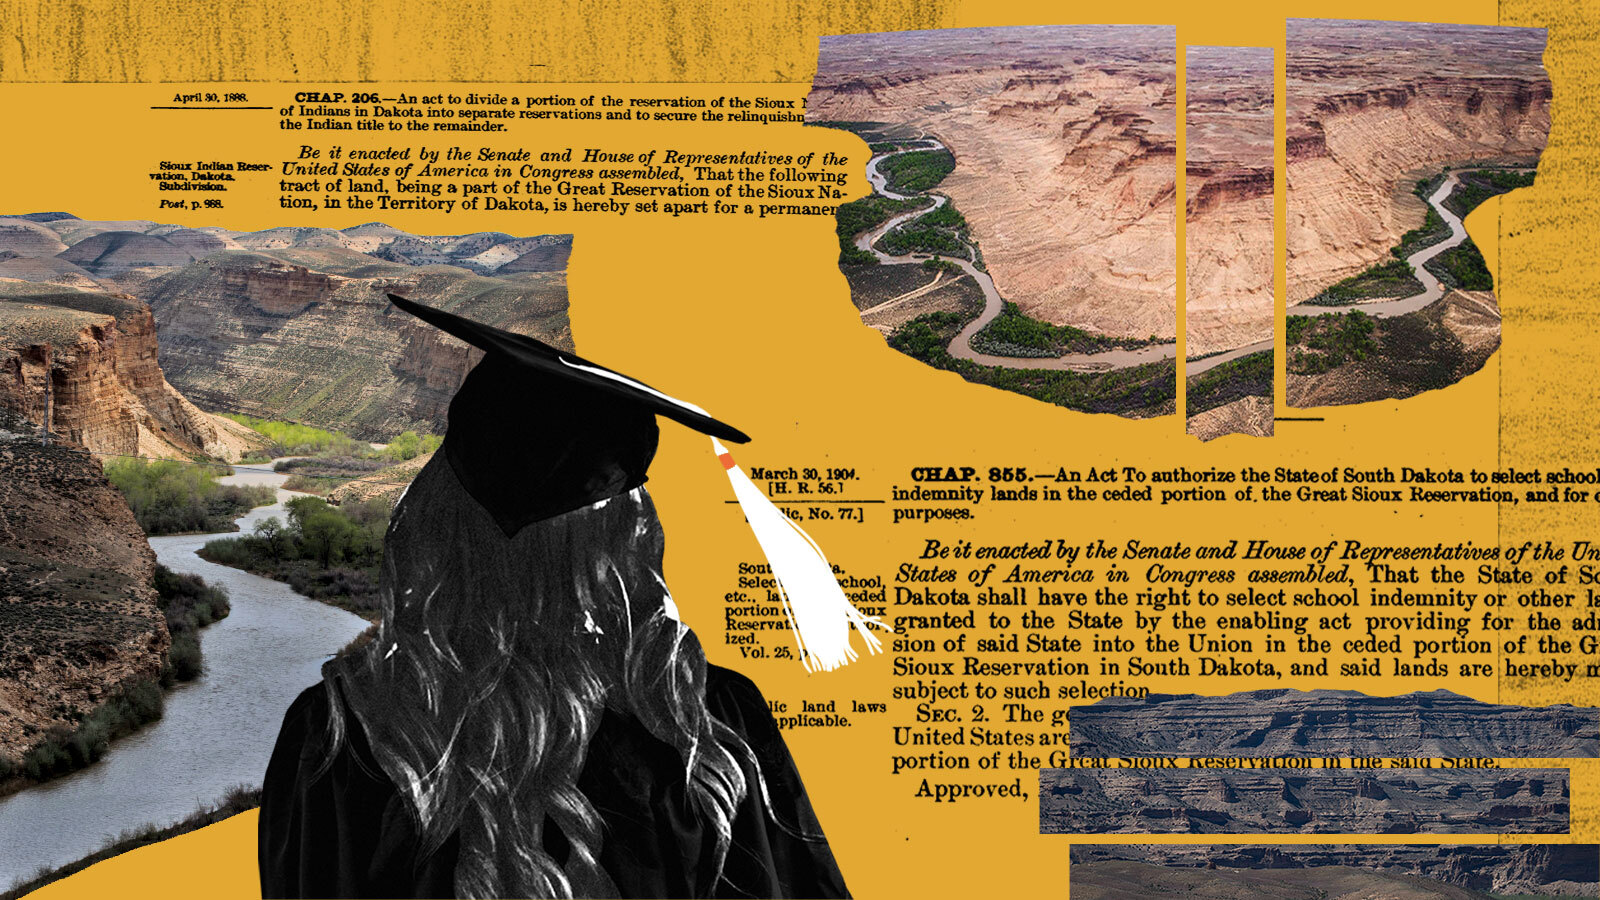 A collage with photos of land (rivers, canyons), a college graduate in cap and gown, and text. The land photos are broken into pieces and moved slightly apart.